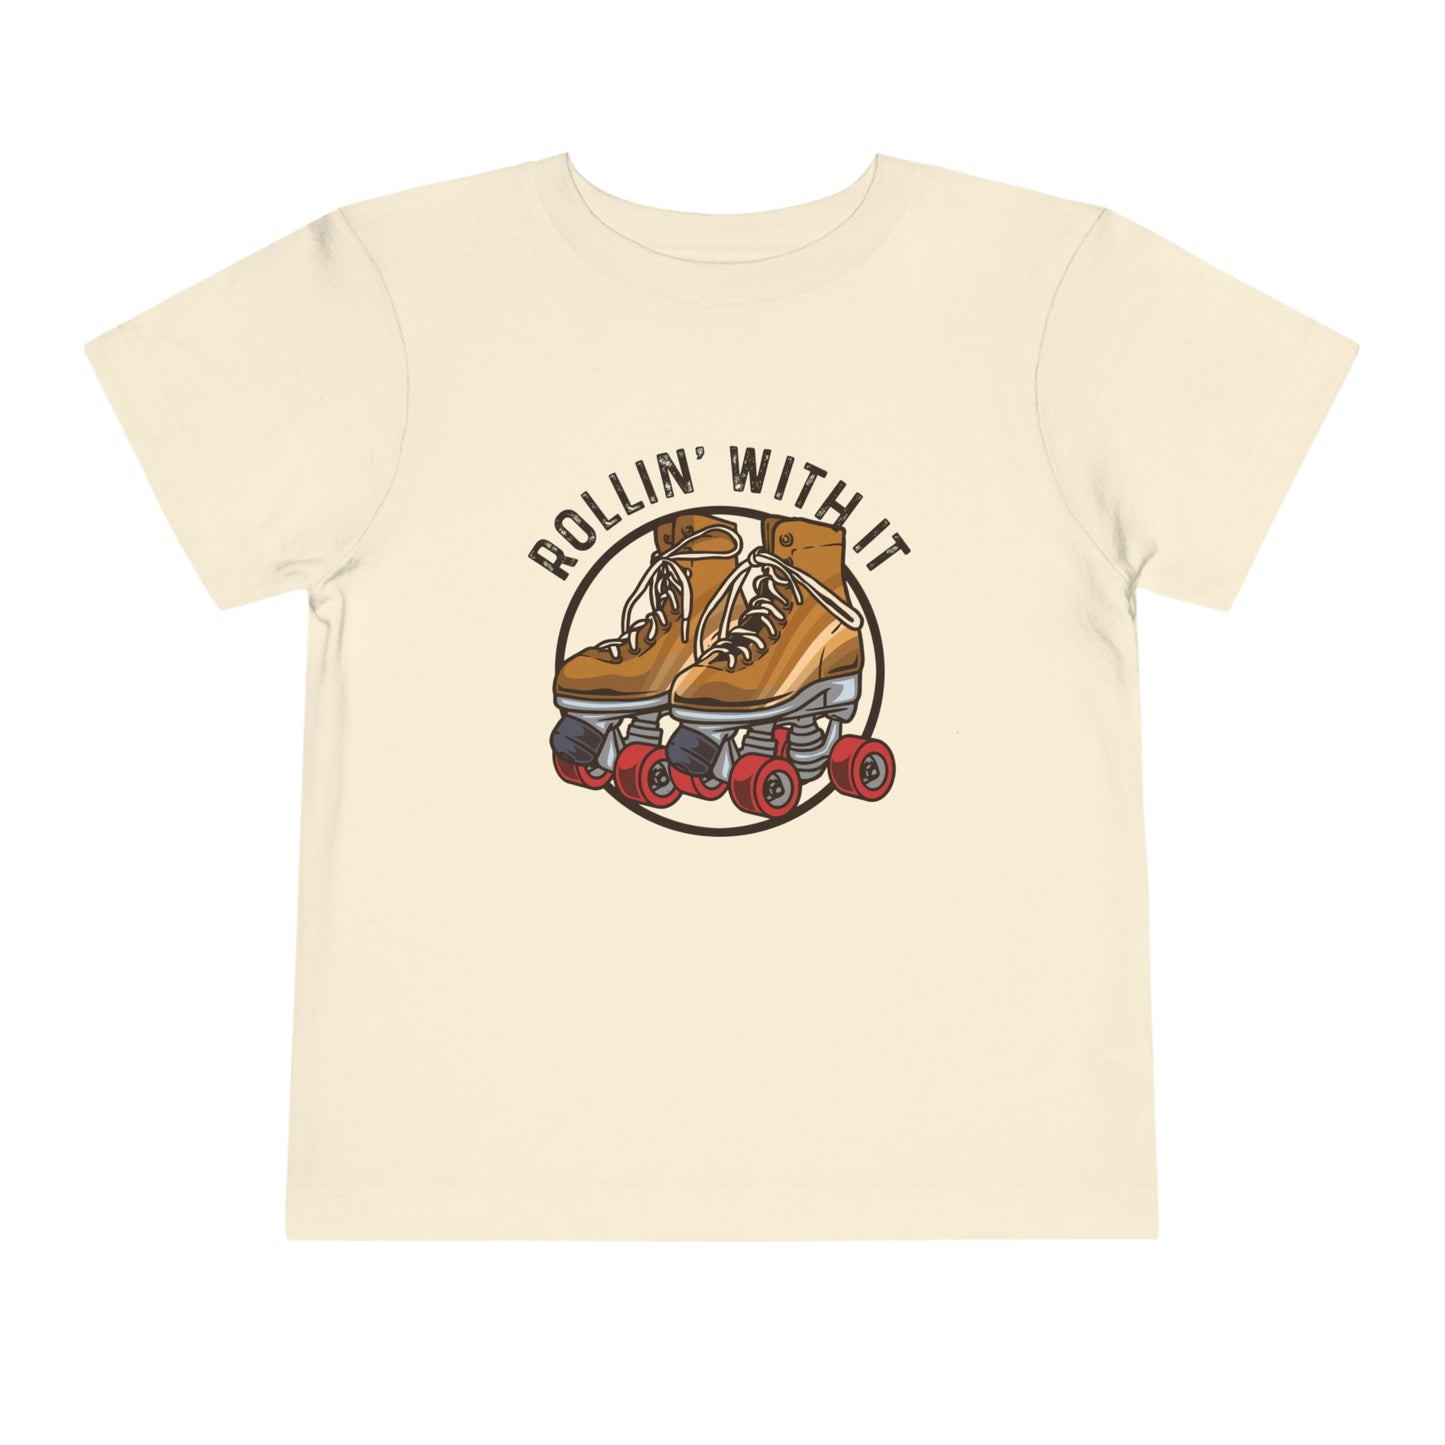 "Rollin With It" Toddler Short Sleeve Tee (2T-5T)